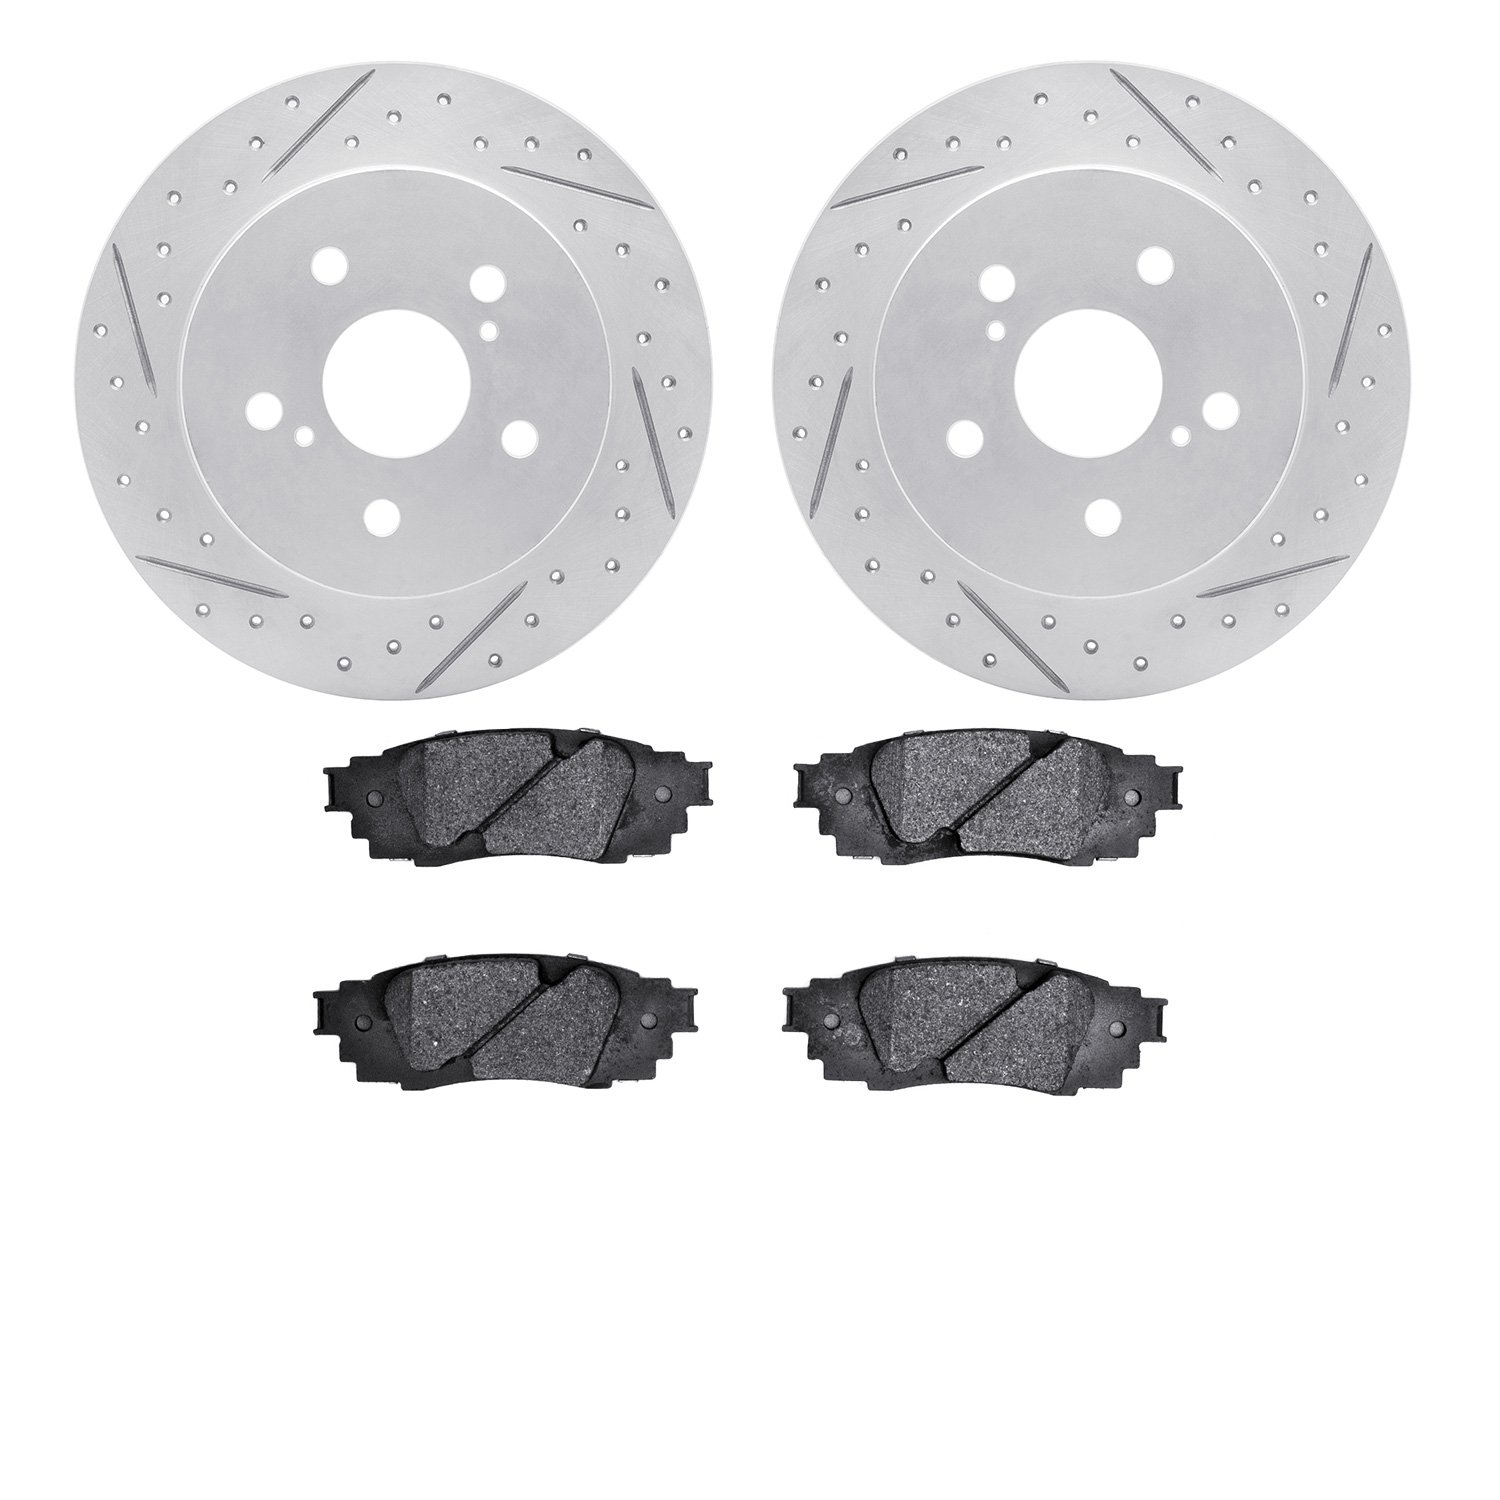 2502-75037 Geoperformance Drilled/Slotted Rotors w/5000 Advanced Brake Pads Kit, Fits Select Lexus/Toyota/Scion, Position: Rear